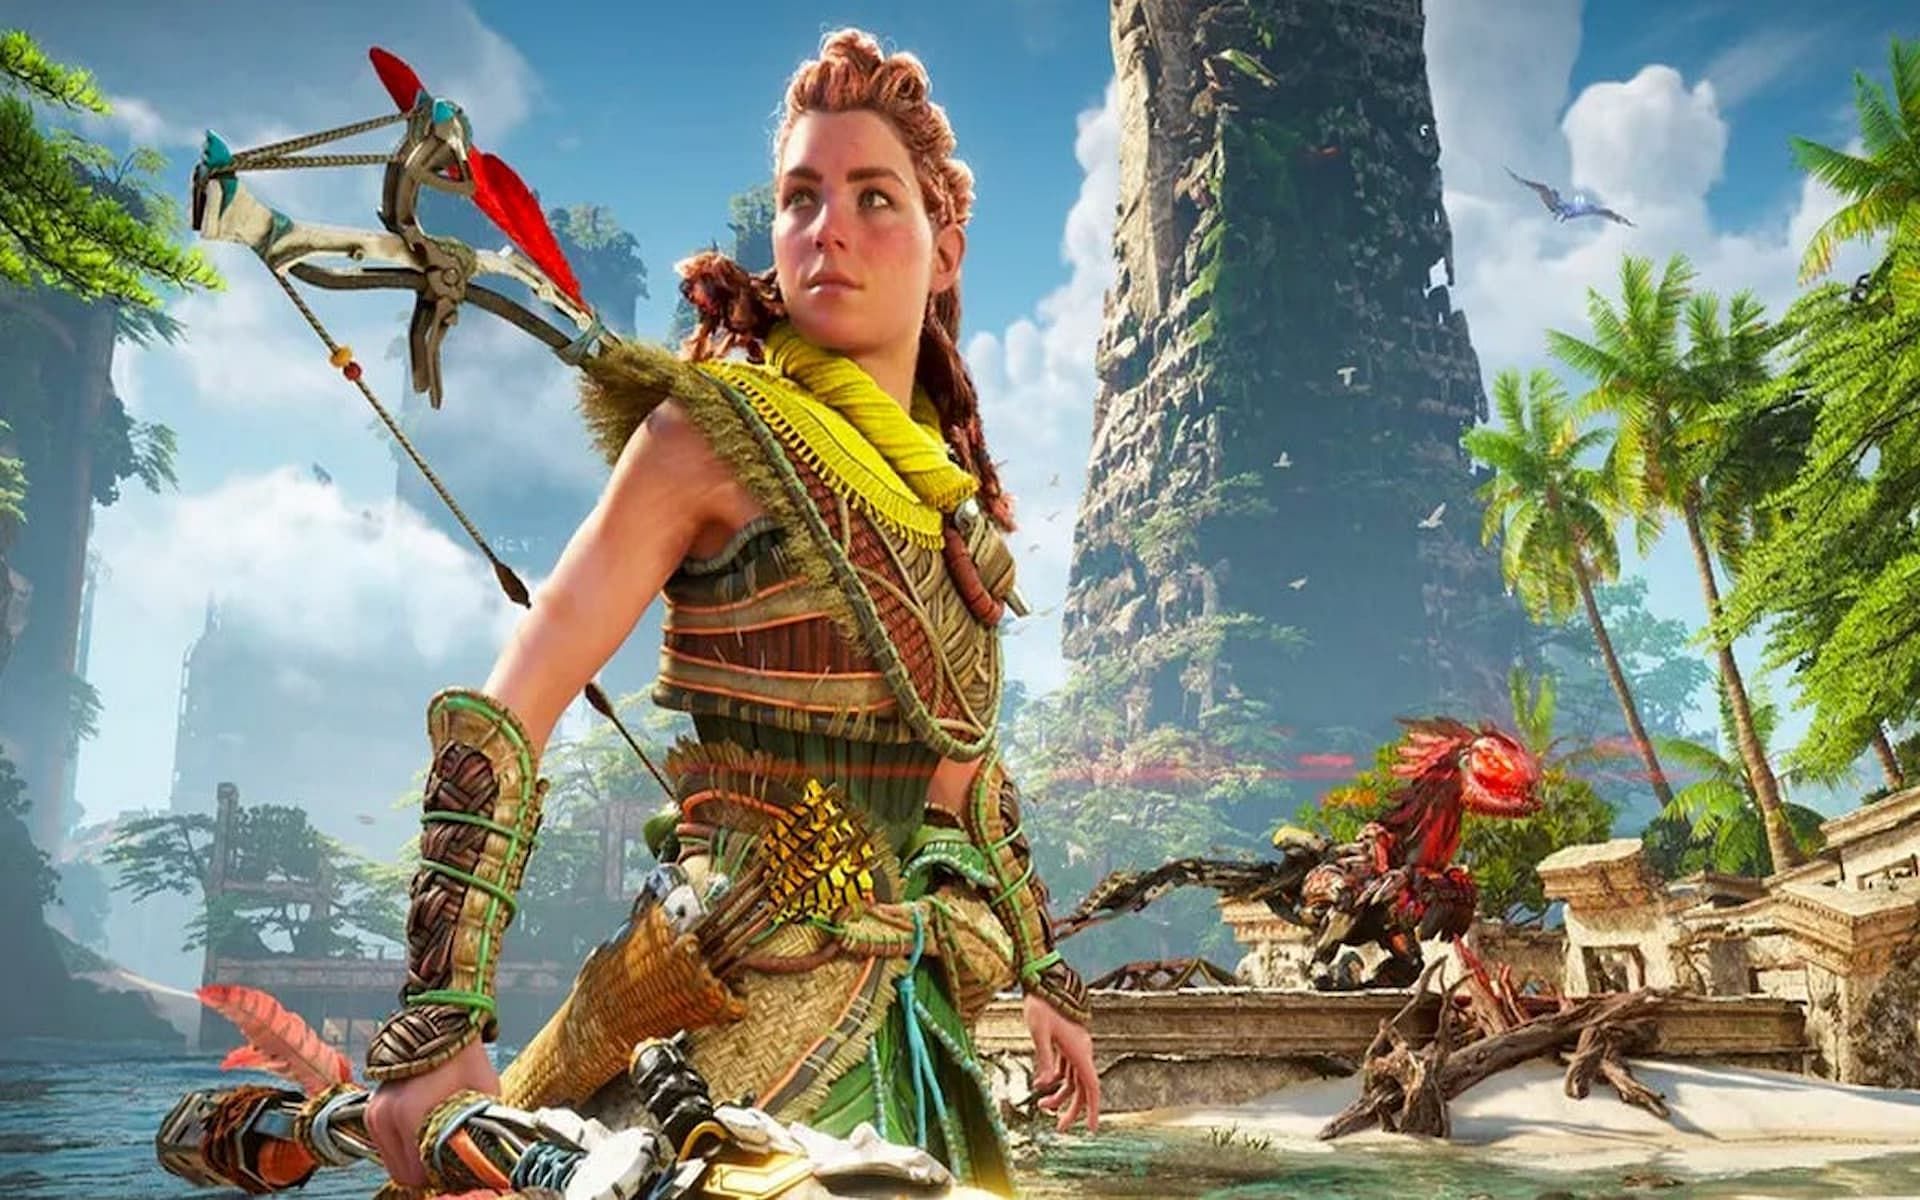 Horizon Forbidden West fans rejoice over DLC finally giving Aloy the moment  we've been waiting for